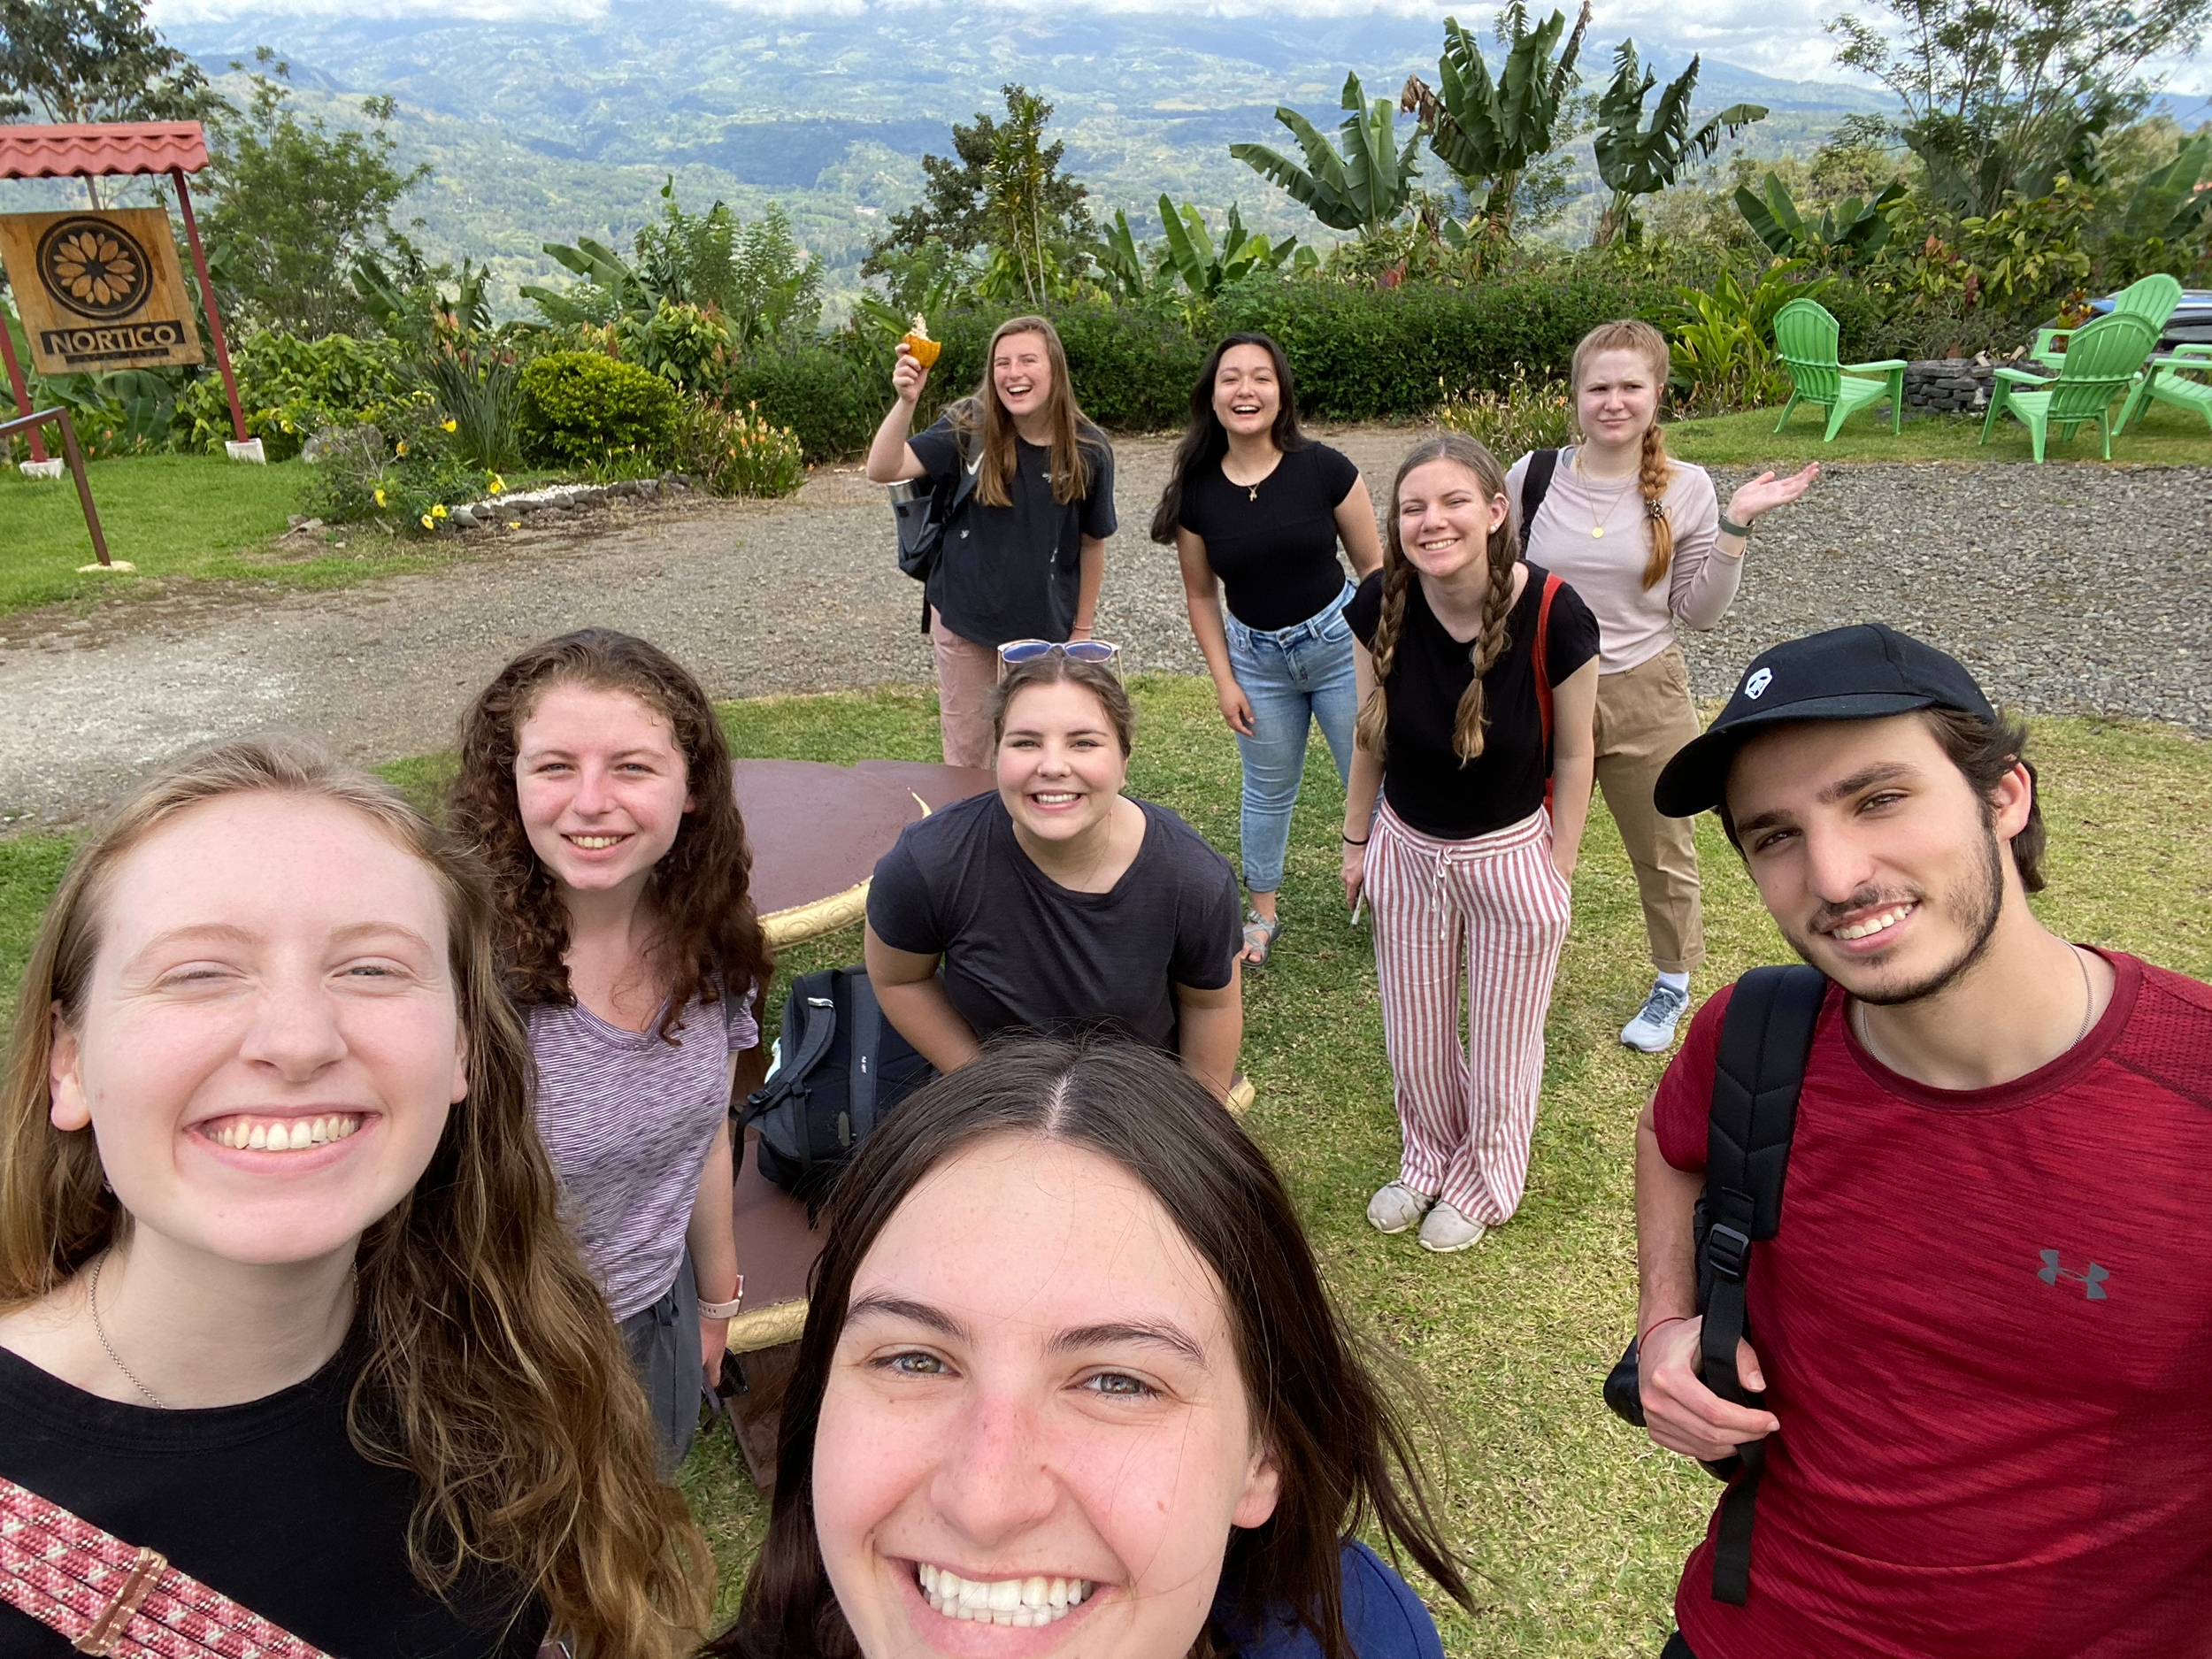 Members of ACU’s Social Enterprise Consulting class toured several sites in Costa Rica including the Nortico Cacao Farm in Turrialba.